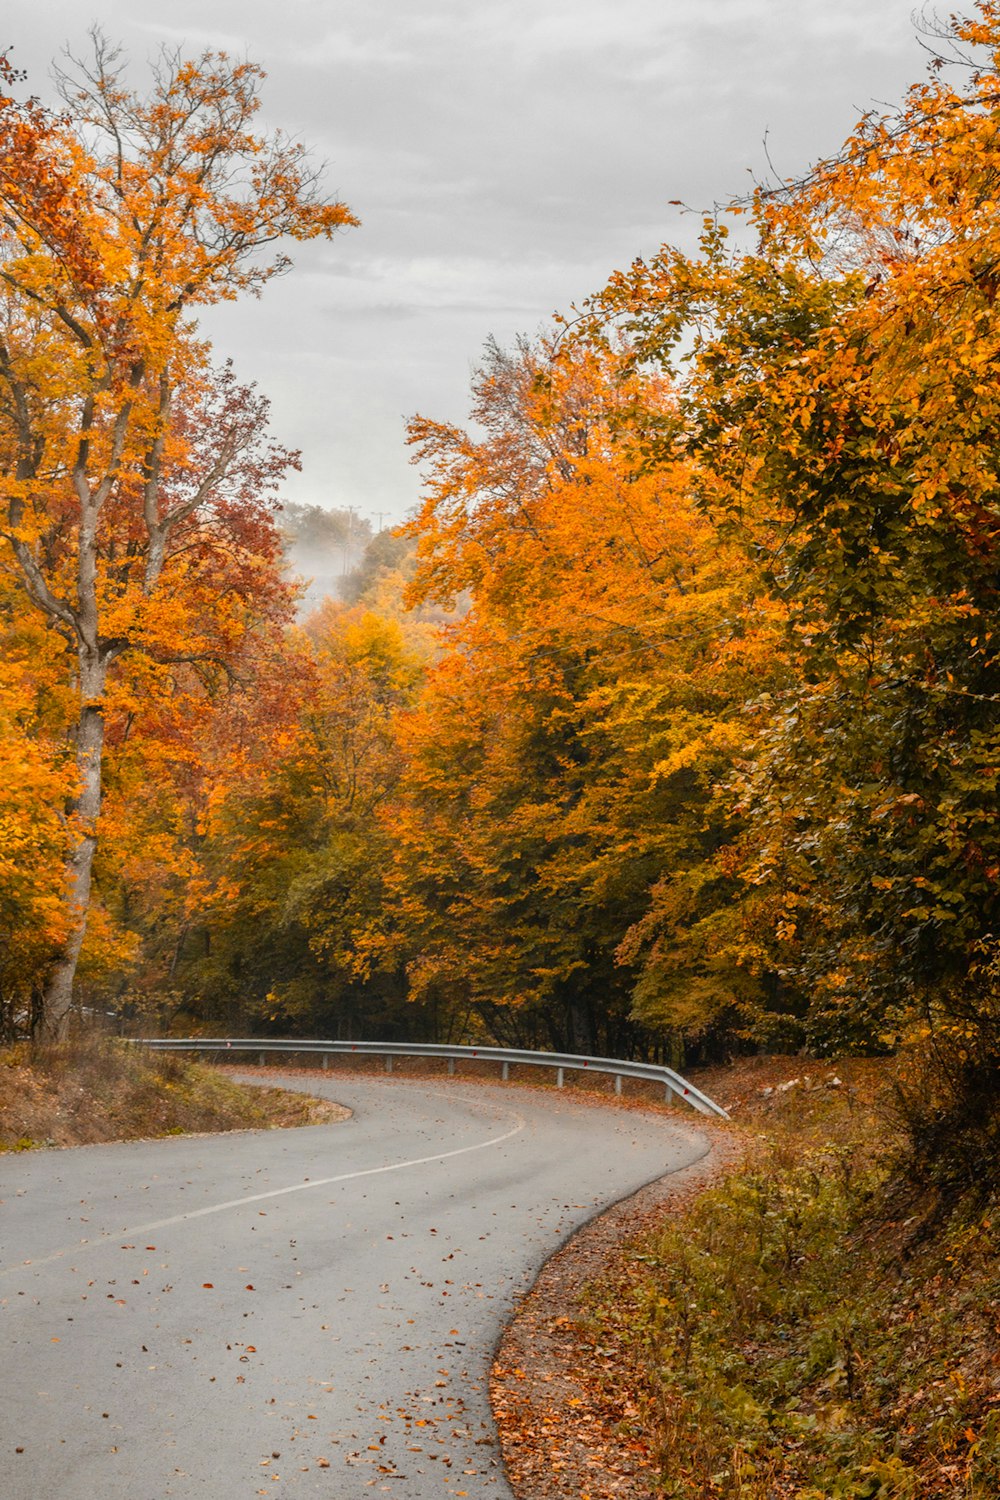 a winding road surrounded by trees in the fall